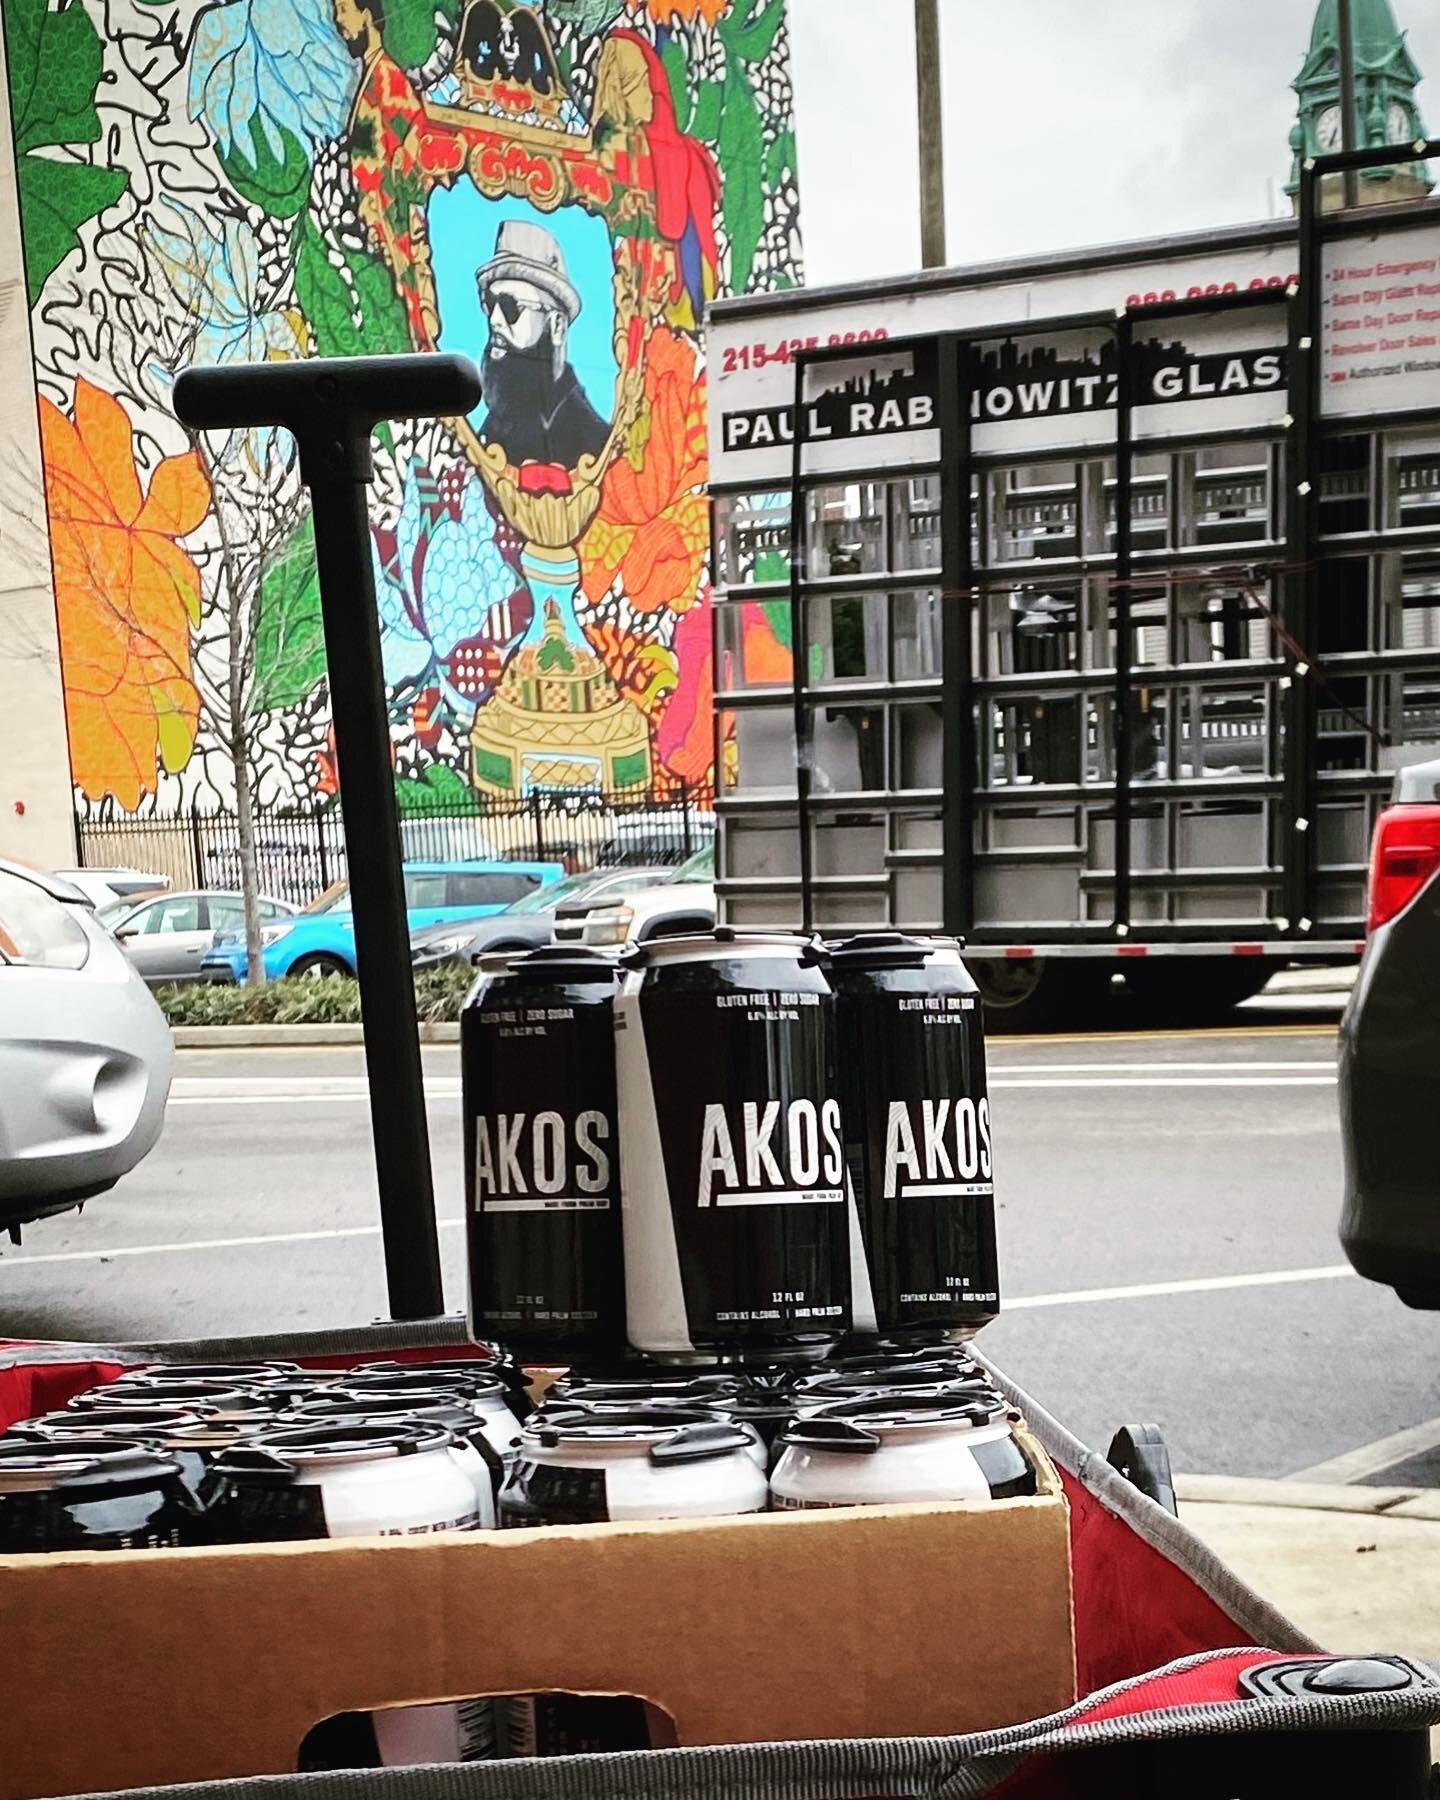 Any day I get to hand deliver 120 cans of 
AKOS: Made from Palm Sap 🍻🌴
via a little red wagon, it&rsquo;s a good day. 
.
Get one of these cans for yourself February 10th at 
.
LUNAR NEW YEAR - YEAR OF THE WOOD DRAGON
🌴🐲🎊
By @manyfortunes hosted 